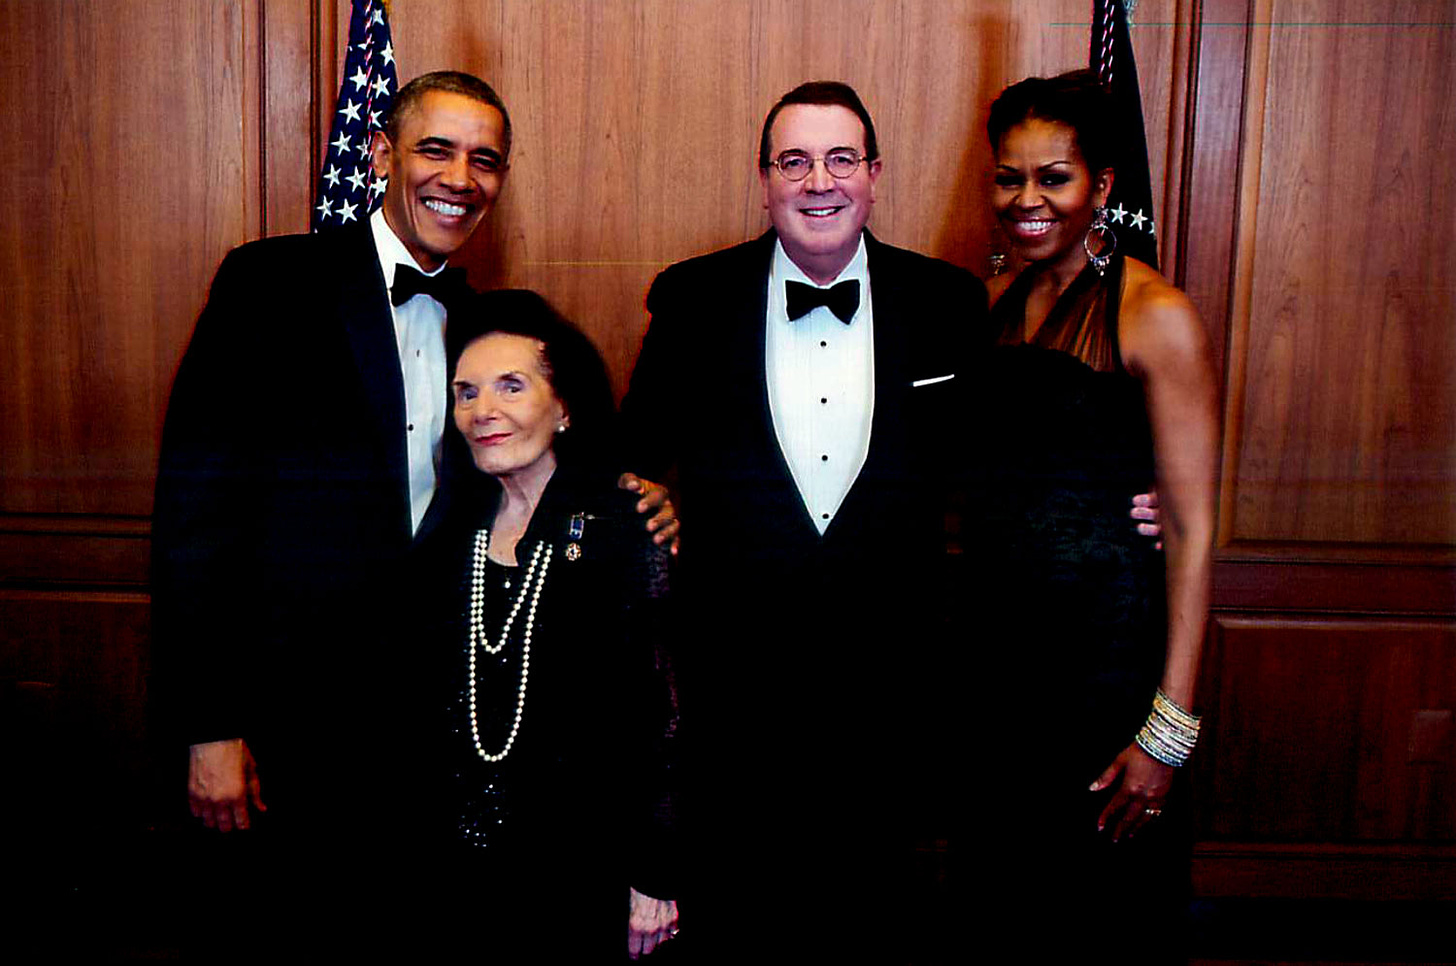 Frances and the Obamas